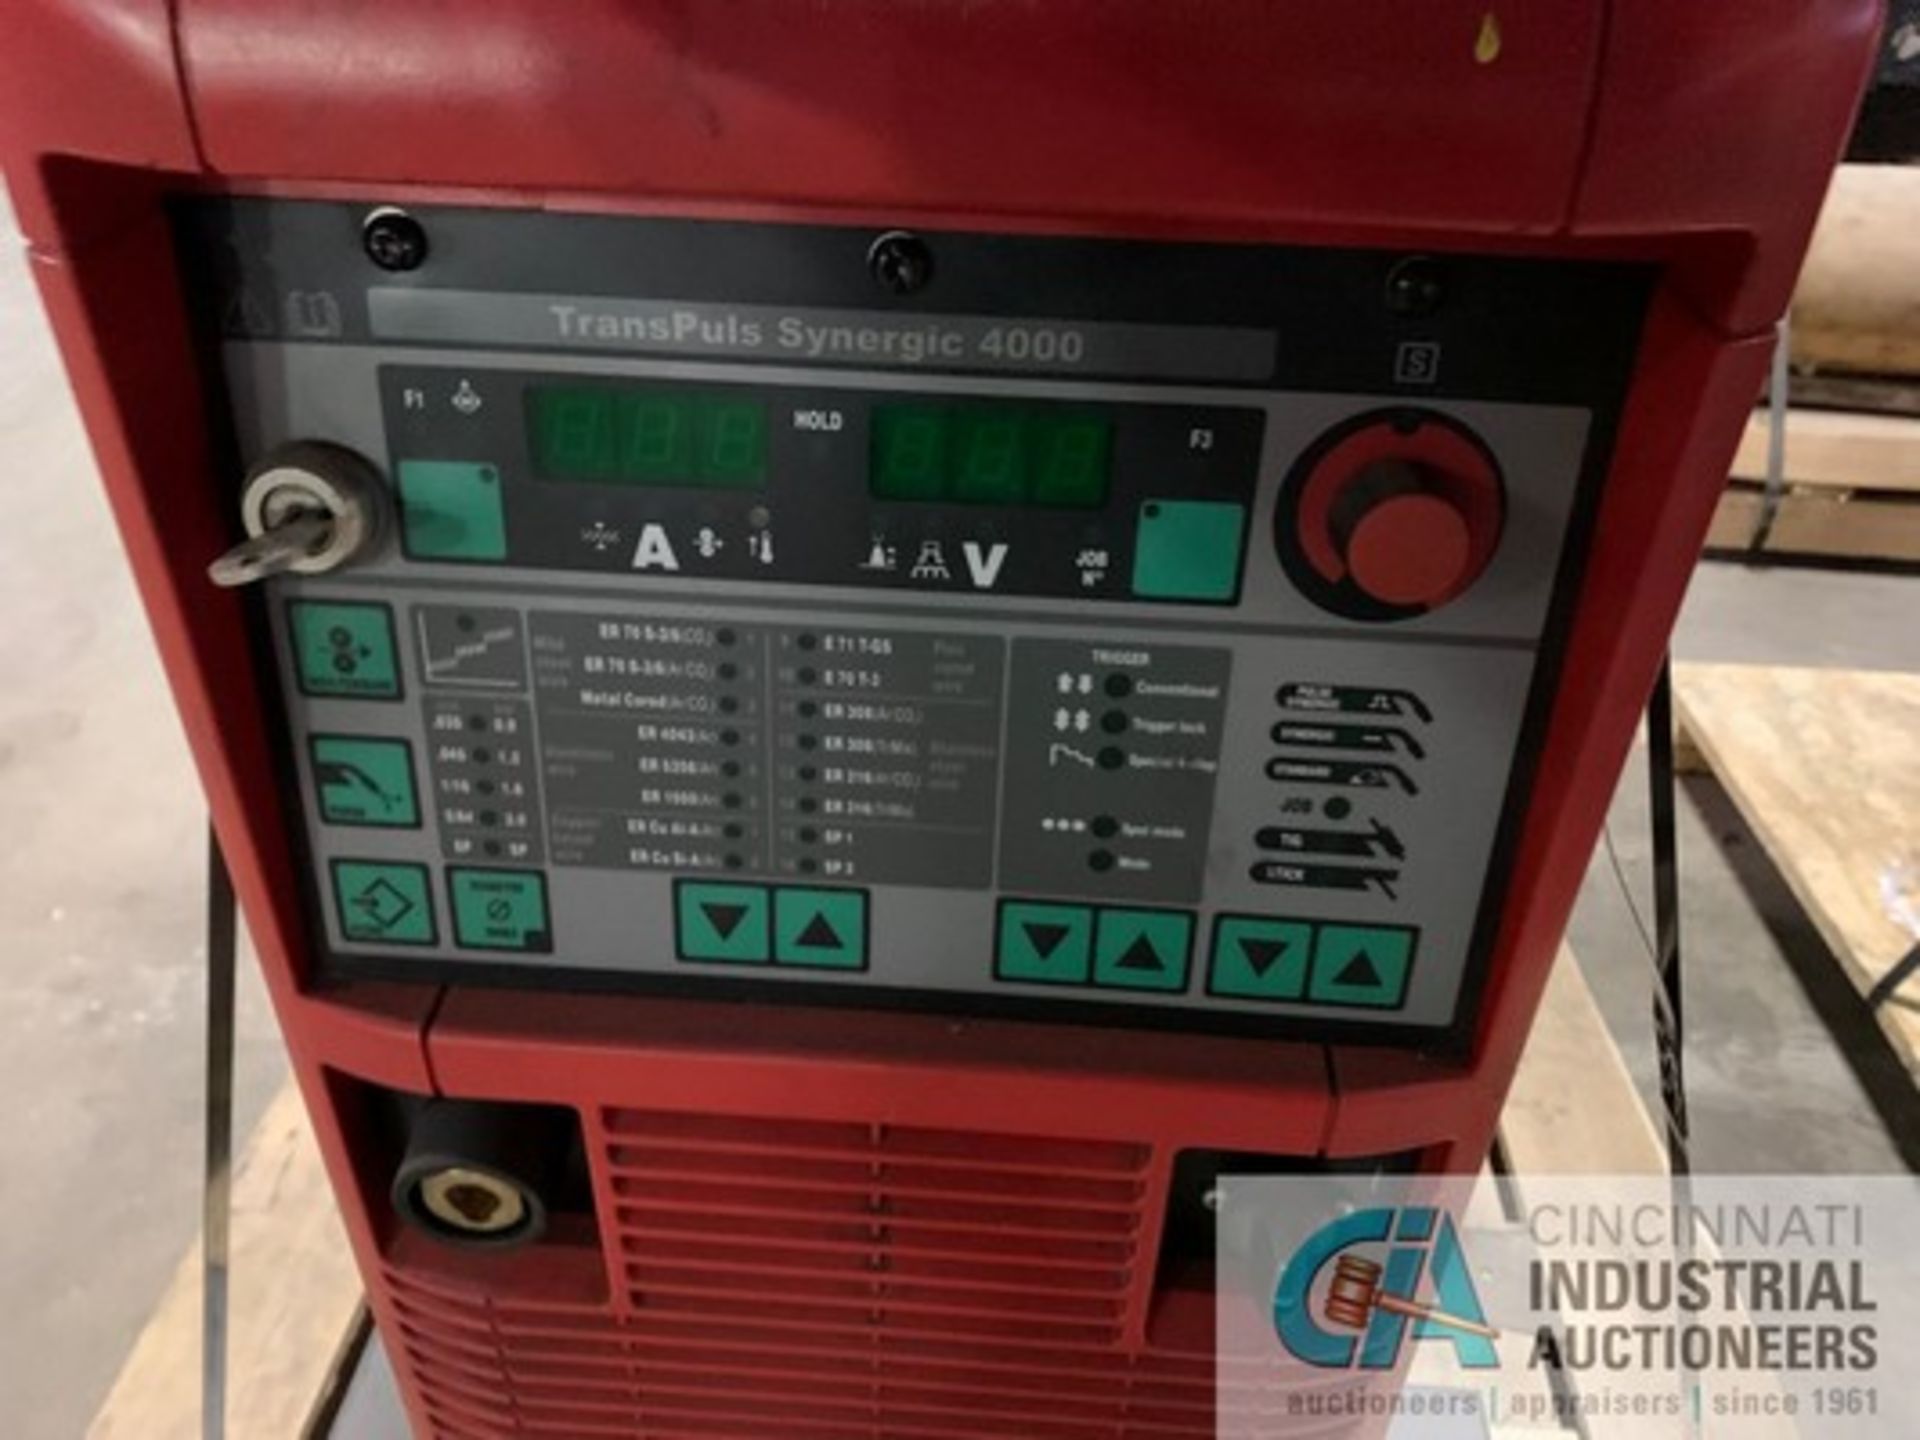 400 AMP FRONIUS TRANS PLUS SYNERGIC 4000 MV MIG WELDING POWER SOURCE S/N 19364307 WITH 24 VOLT - Image 6 of 8